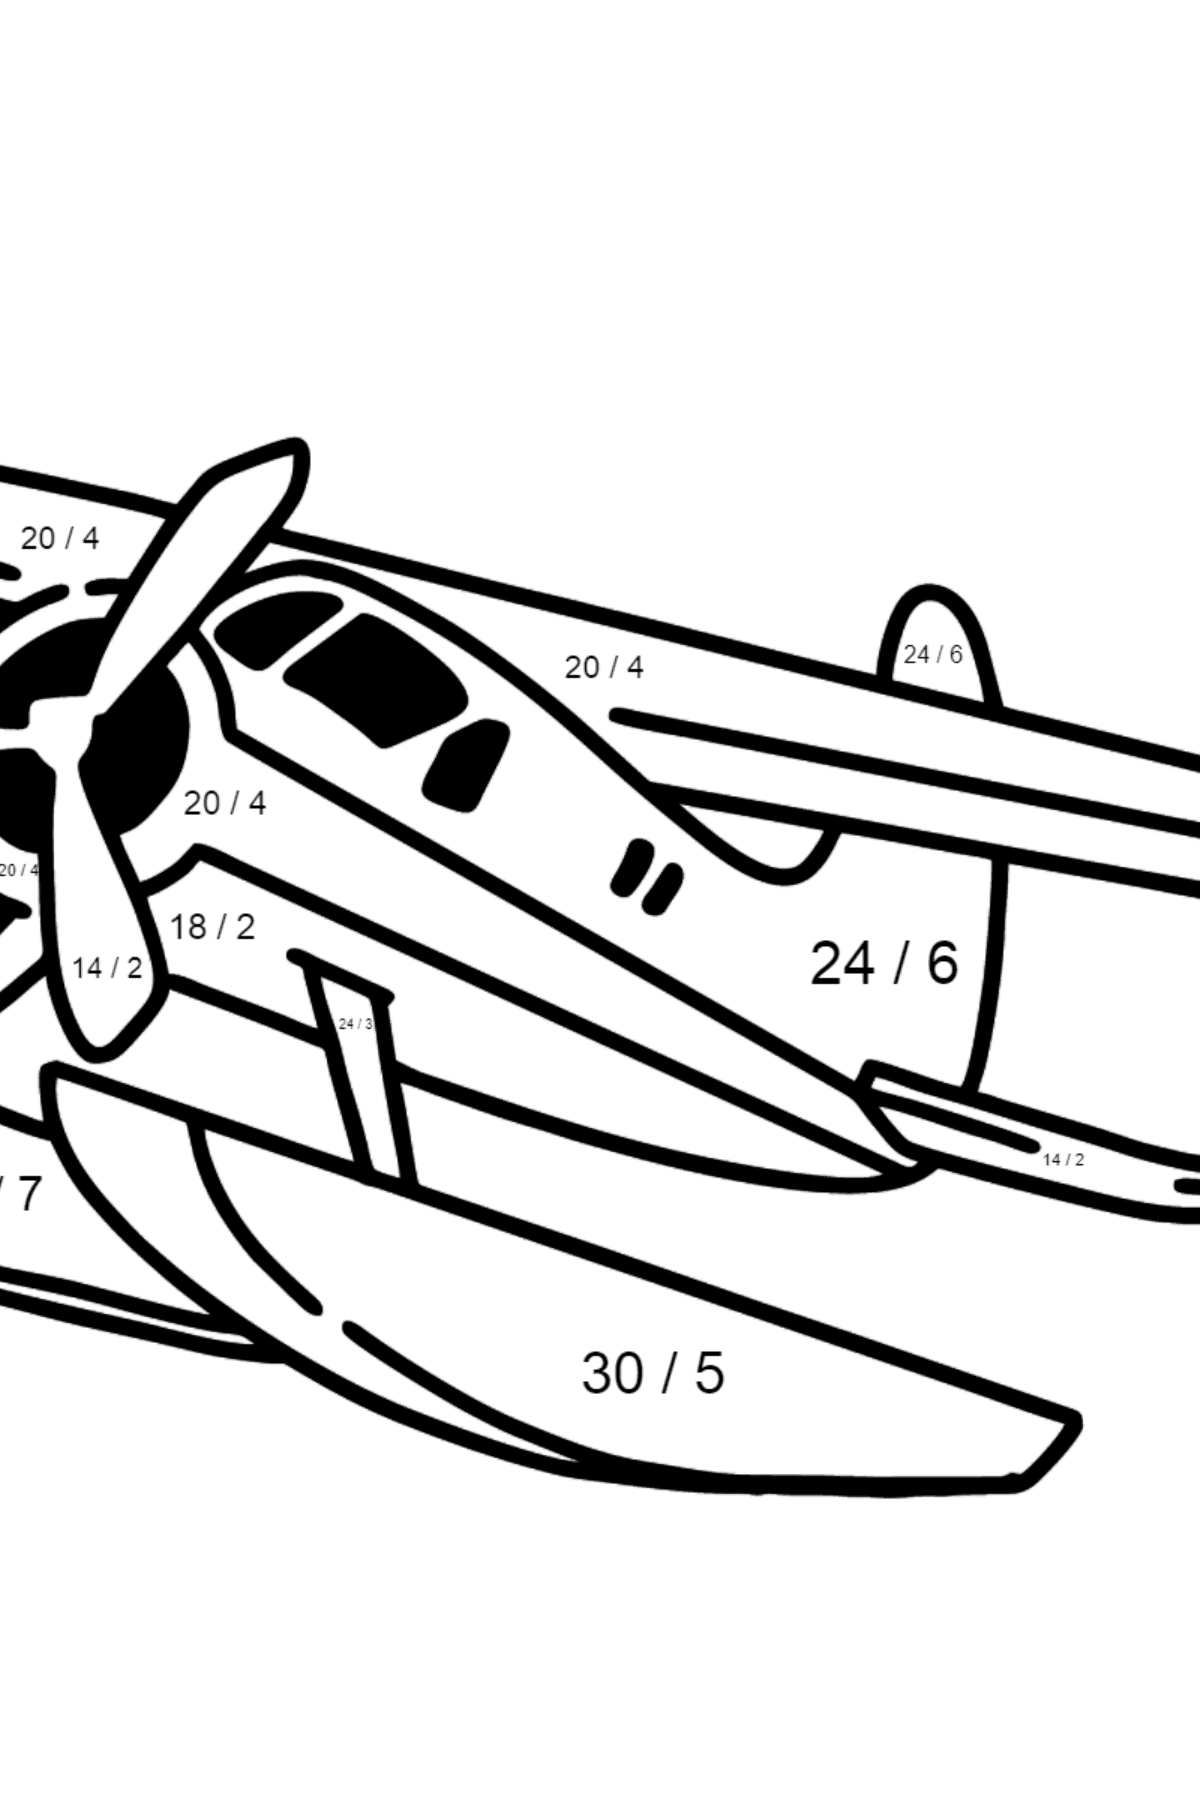 Jet Airplane BE-200 coloring page - Math Coloring - Division for Kids